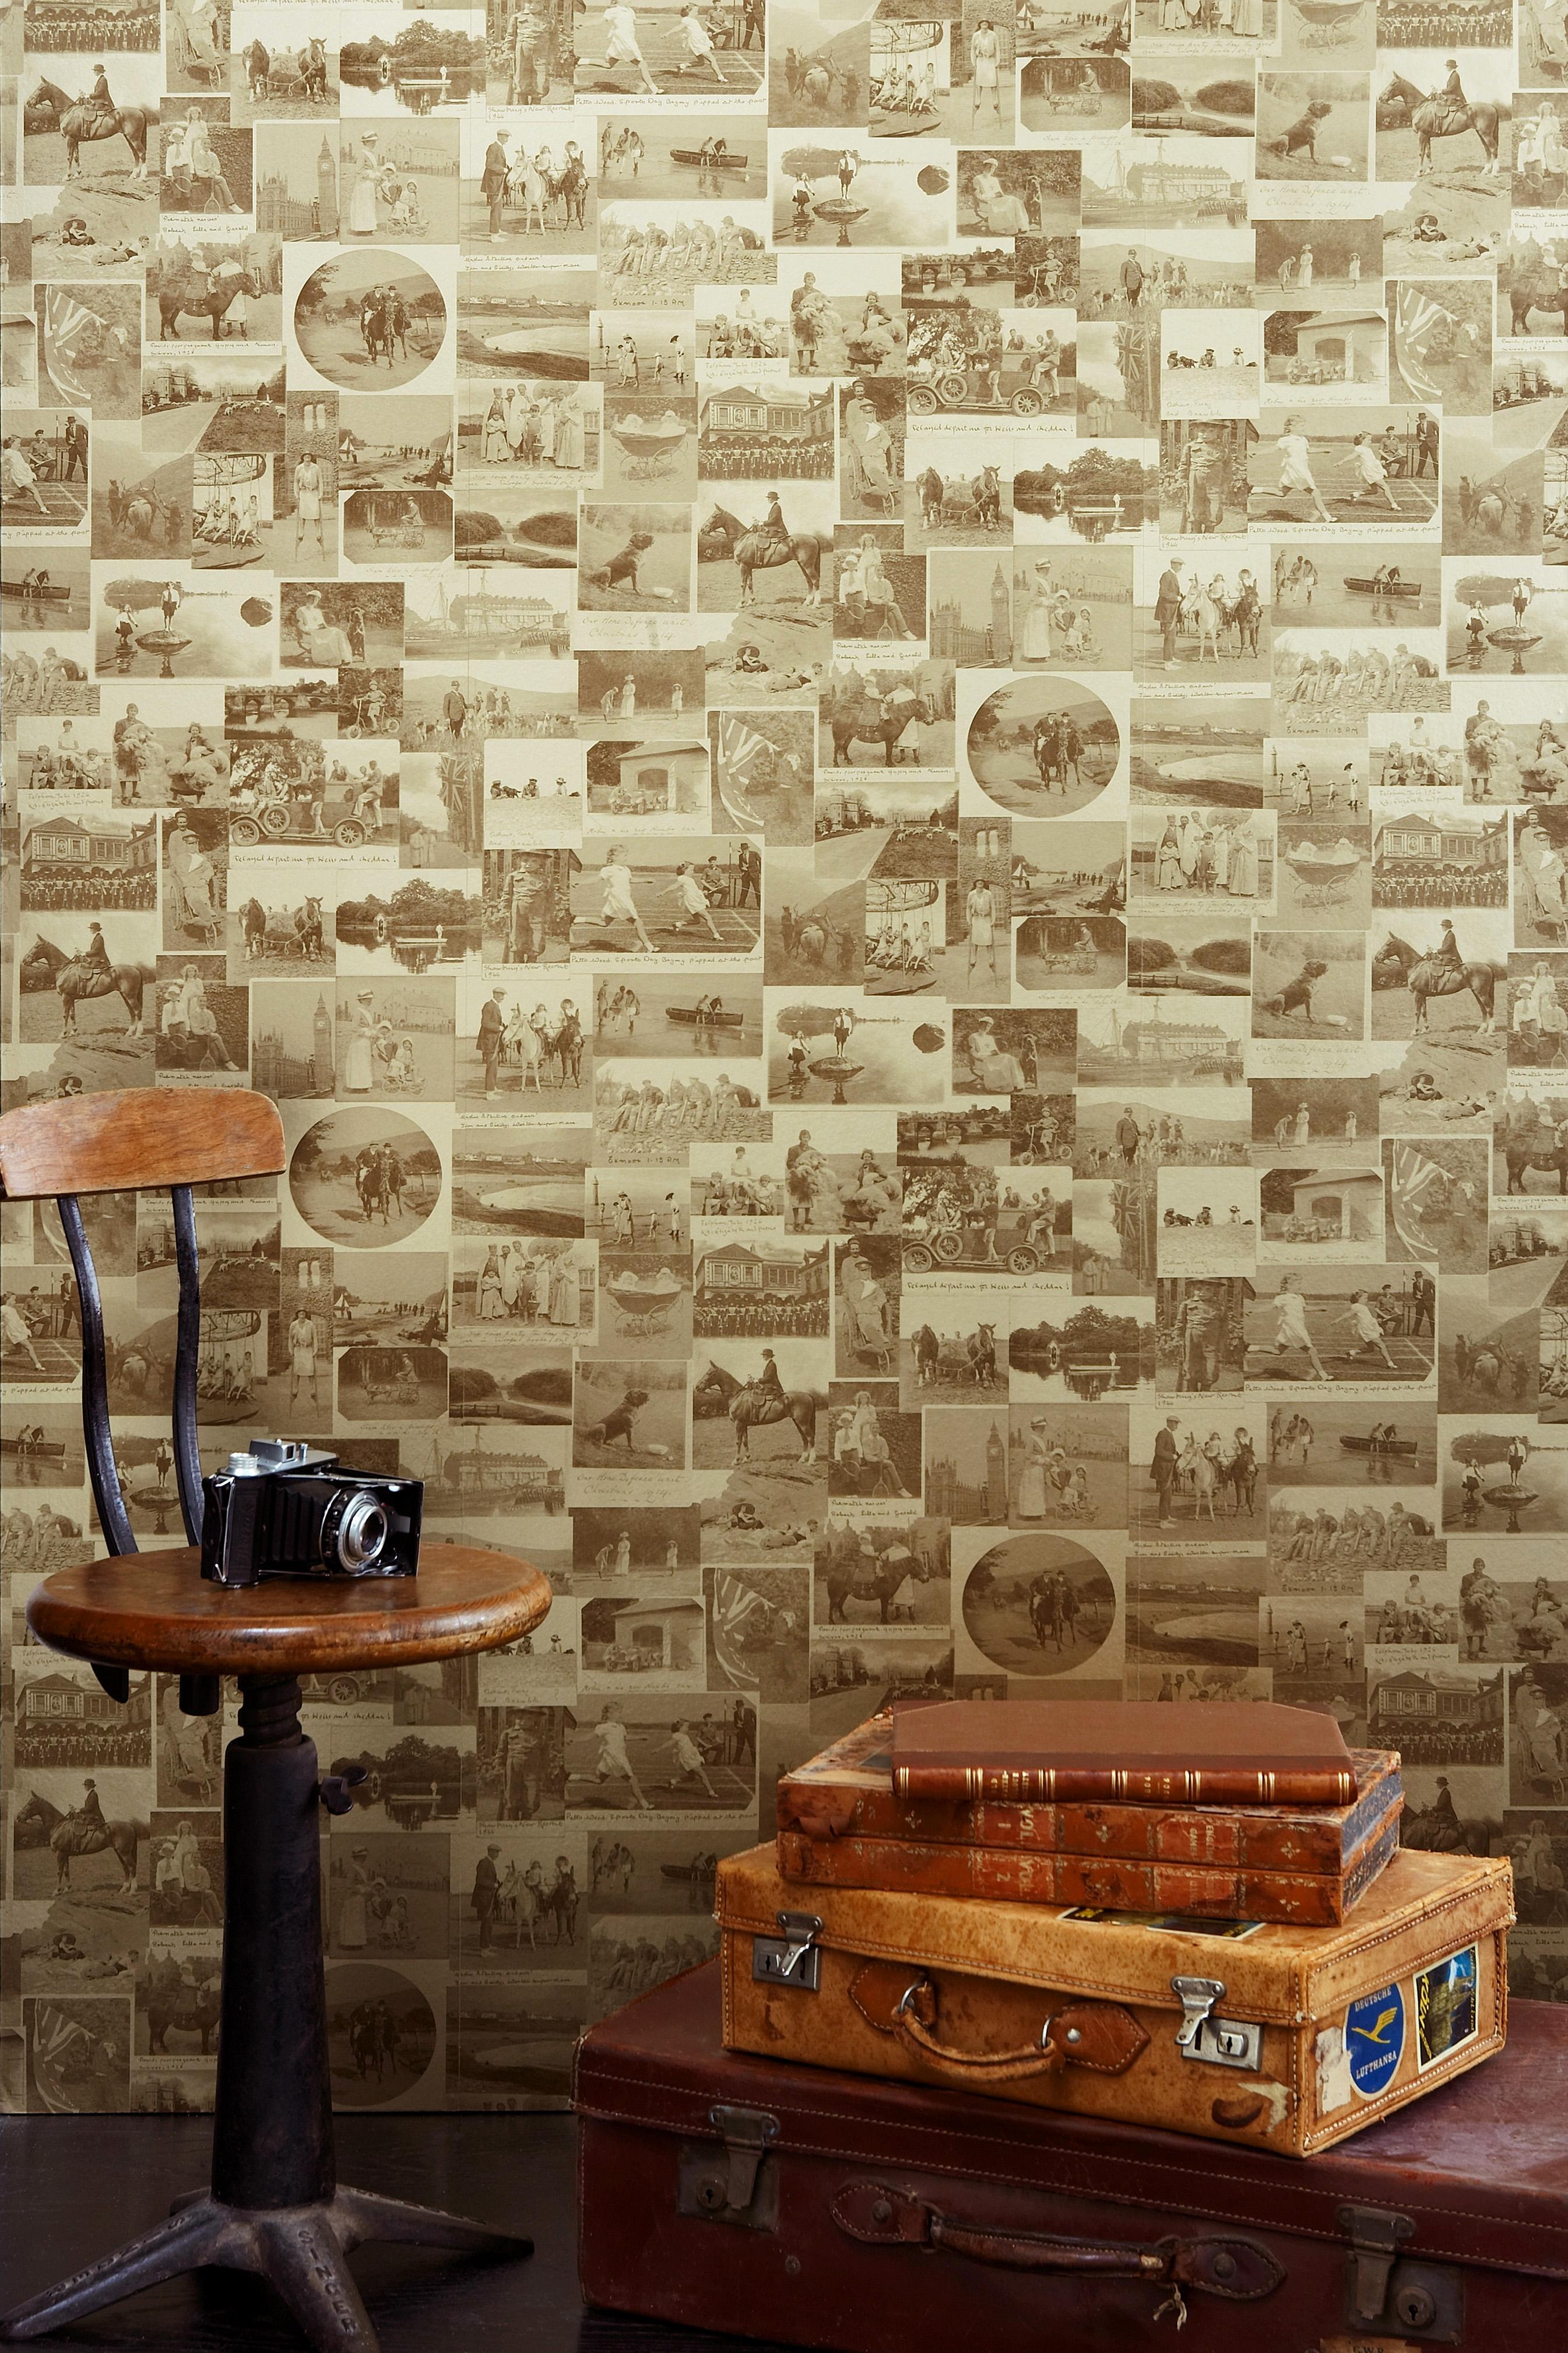 Trim width: 52cm/20.5 inches
Roll Length: 10m
Pattern Repeat: Half Drop 
Match Length: 68.5cm/27 inches.

Please get in contact to order a sample.

Line your walls with nostalgia with the vintage British photographic scenes, from times during